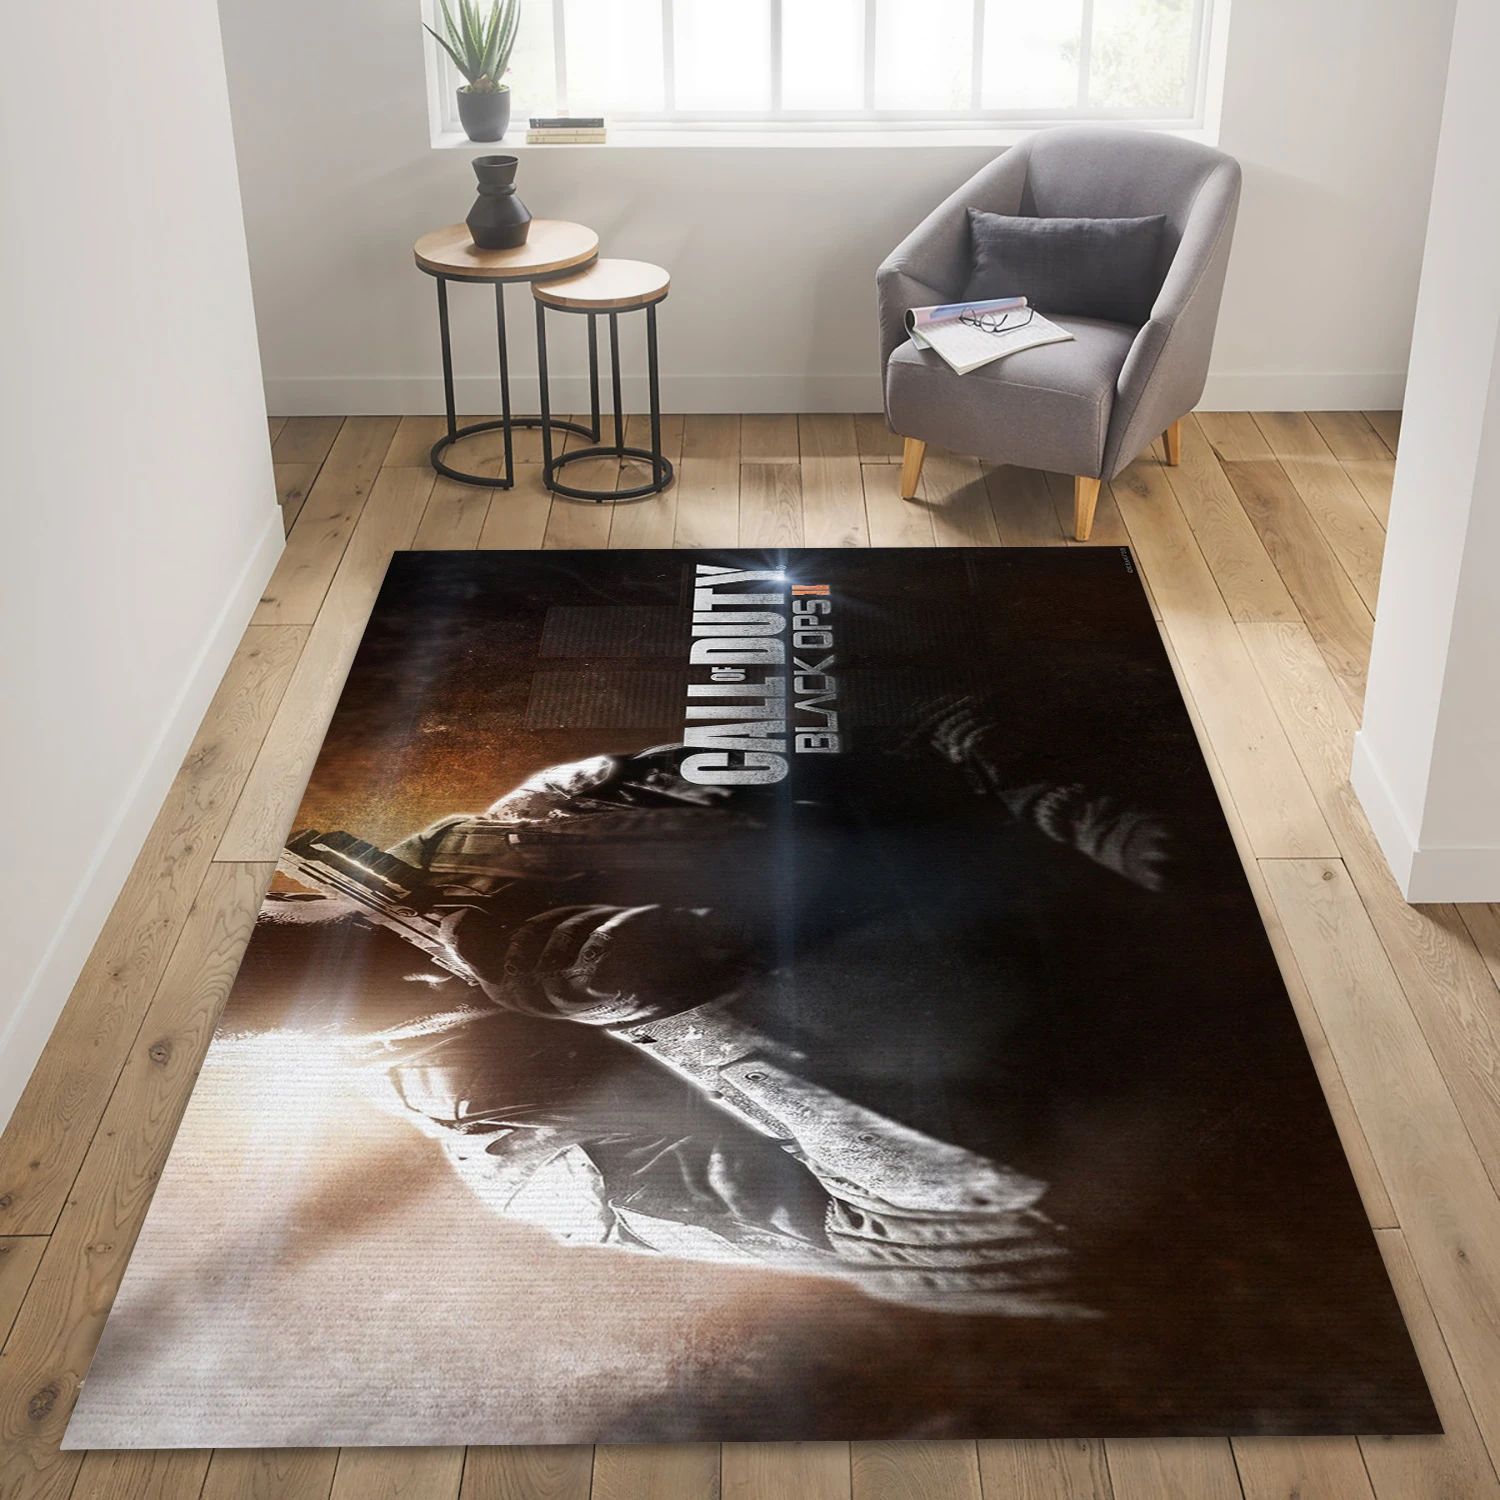 Call Of Duty Black Ops 2 Video Game Area Rug Area, Living Room Rug - Home Decor Floor Decor - Indoor Outdoor Rugs 1